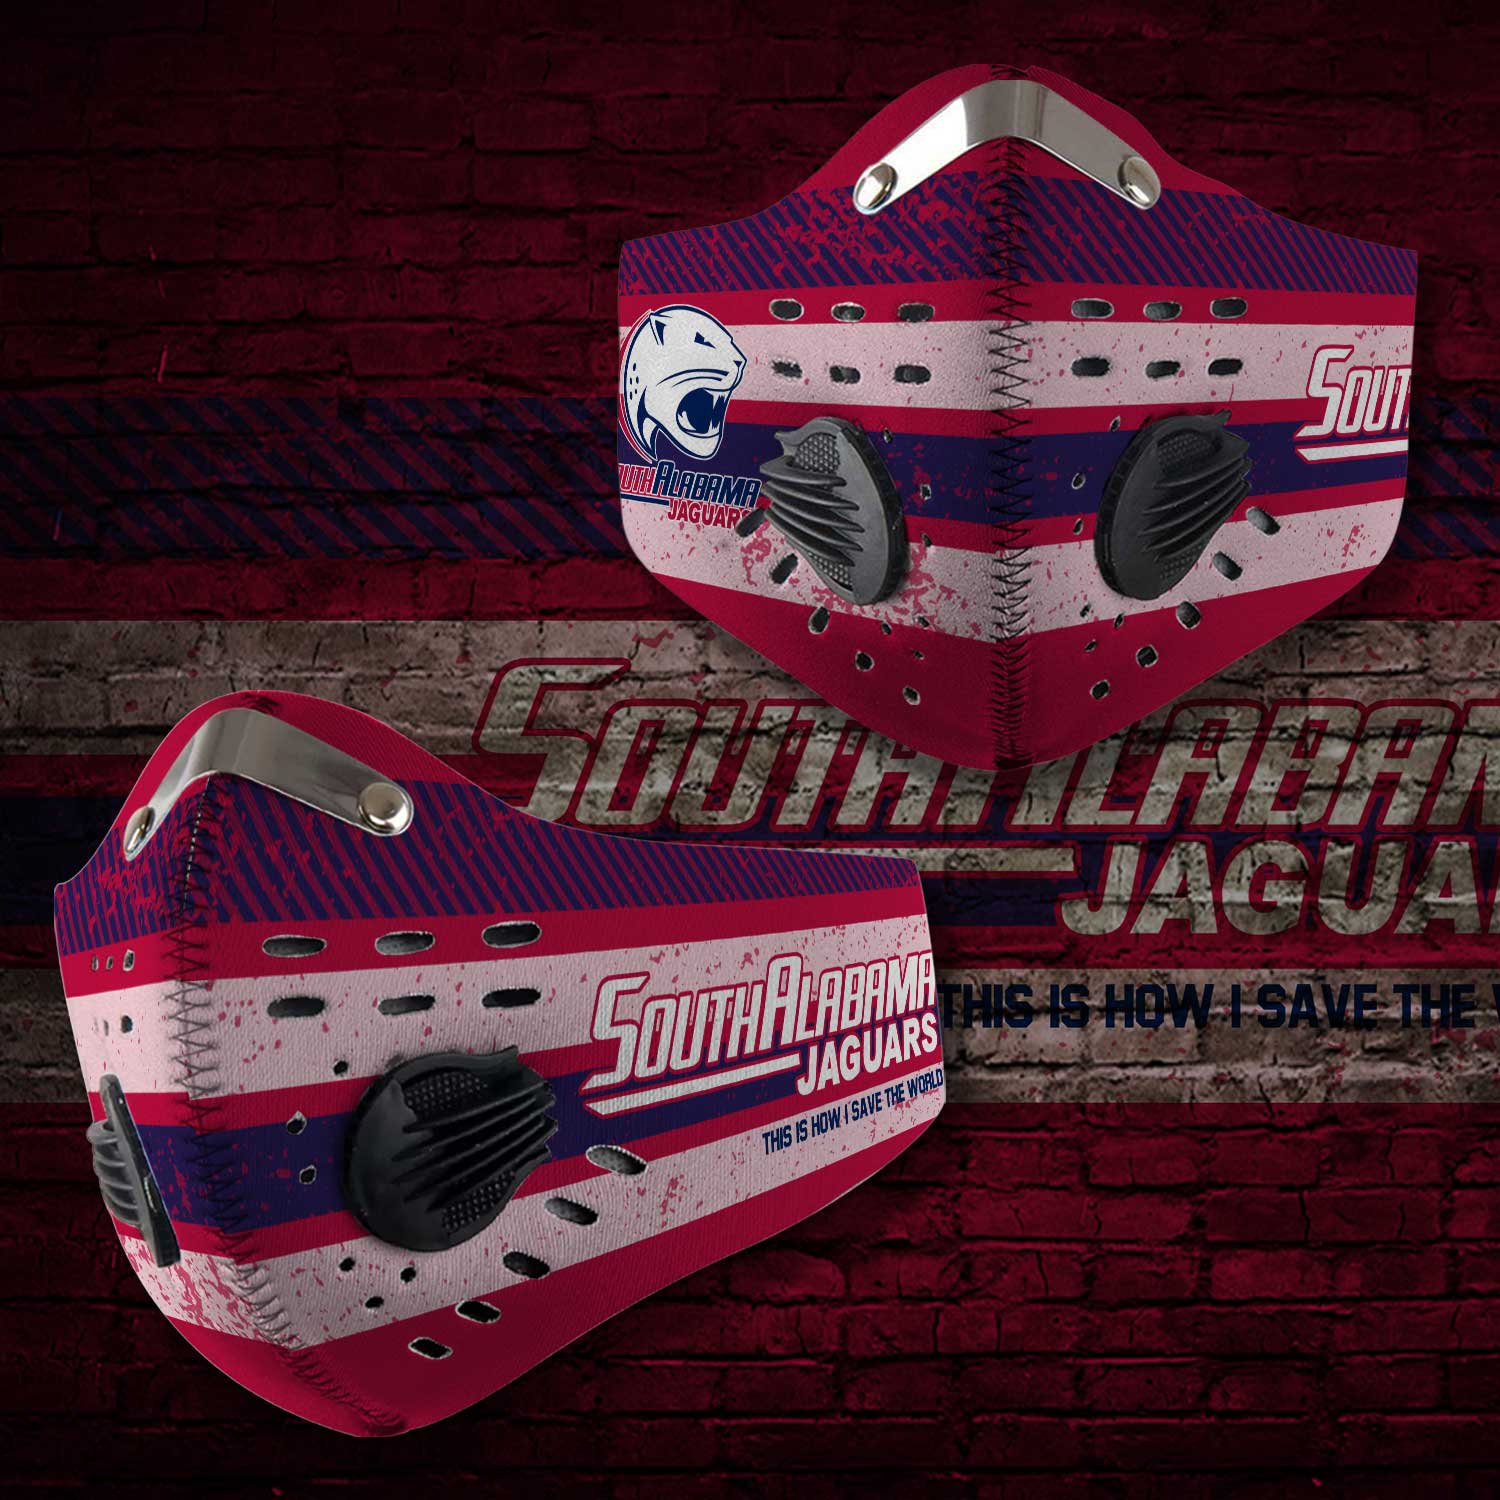 South alabama jaguars this is how i save the world face mask 1